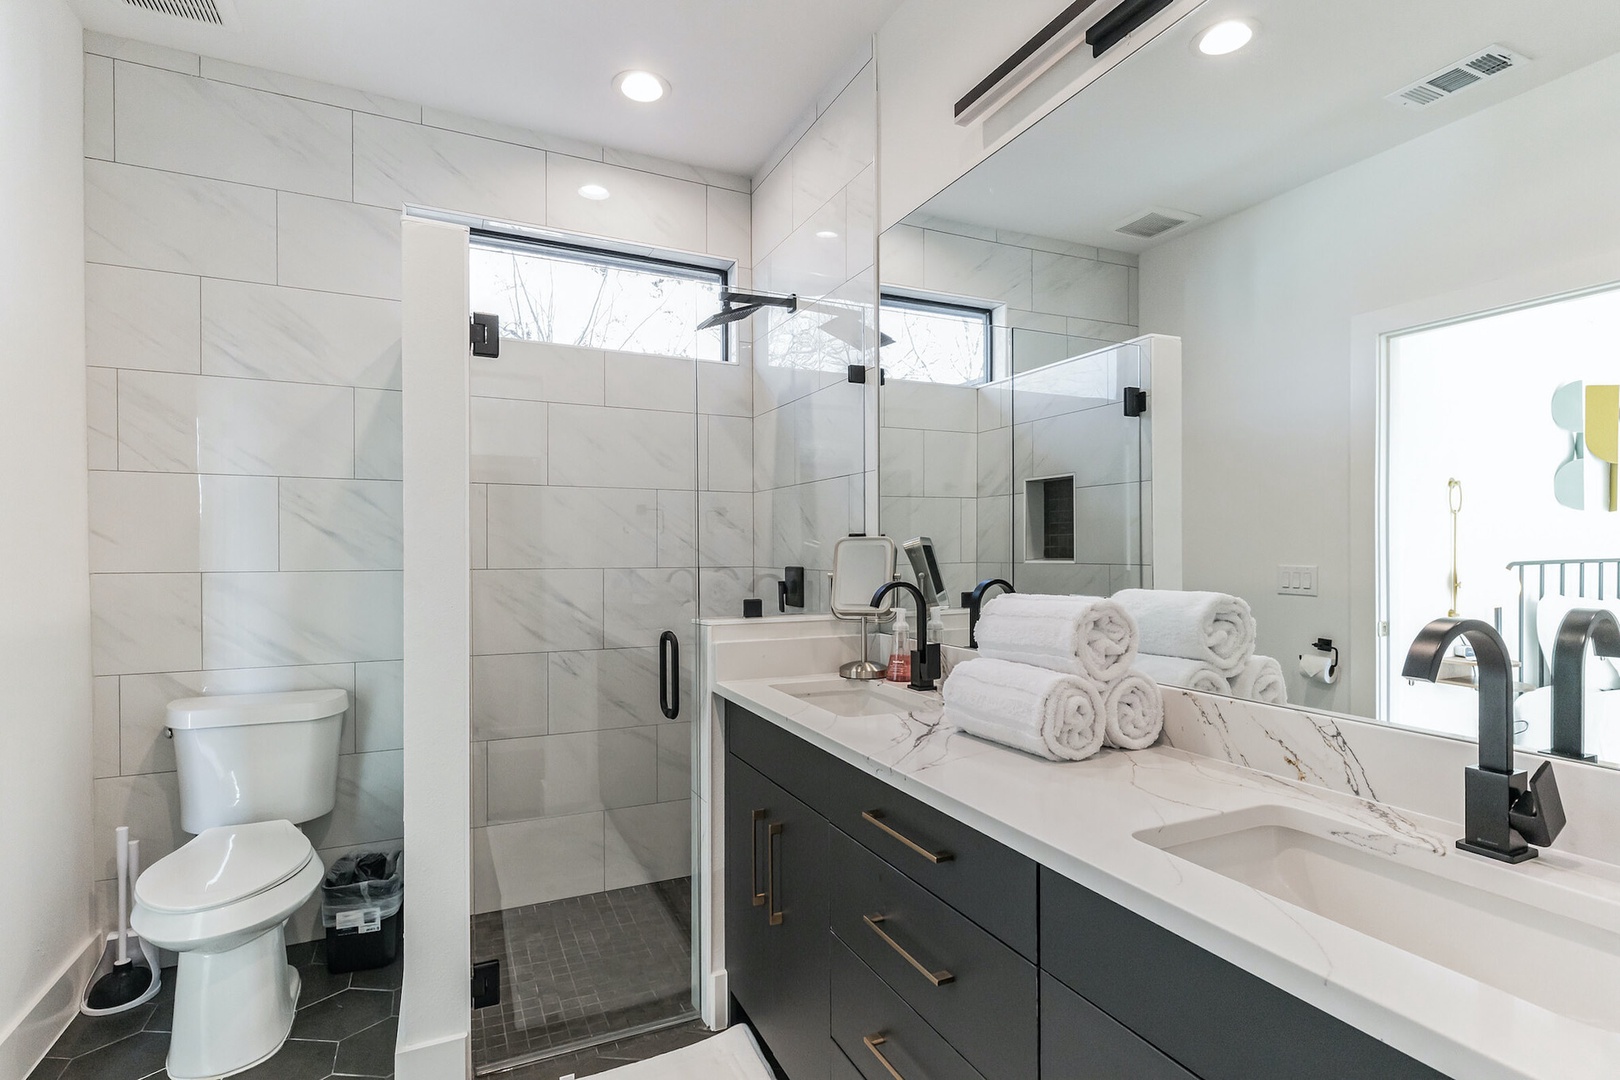 En-suite bathroom with stand-up shower